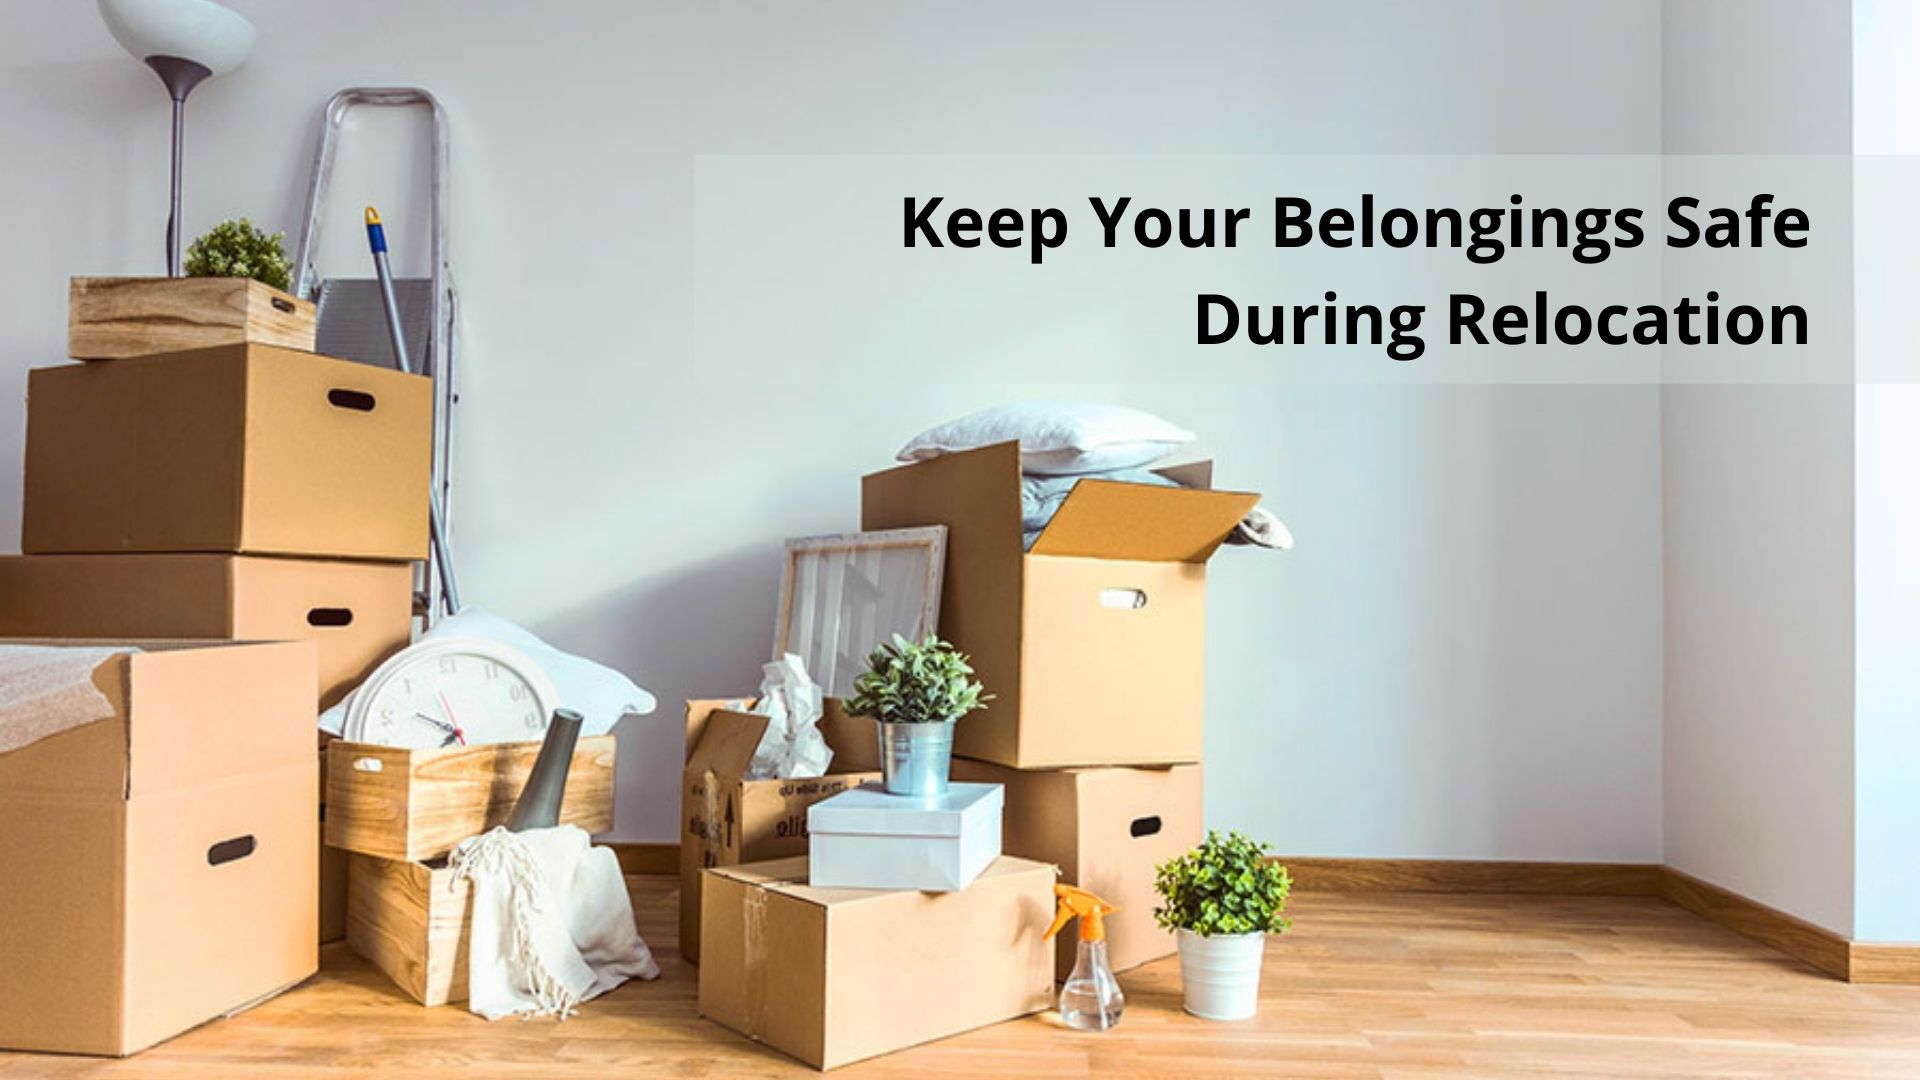 Smart Tips to Keep Your Belongings Safe During Relocation